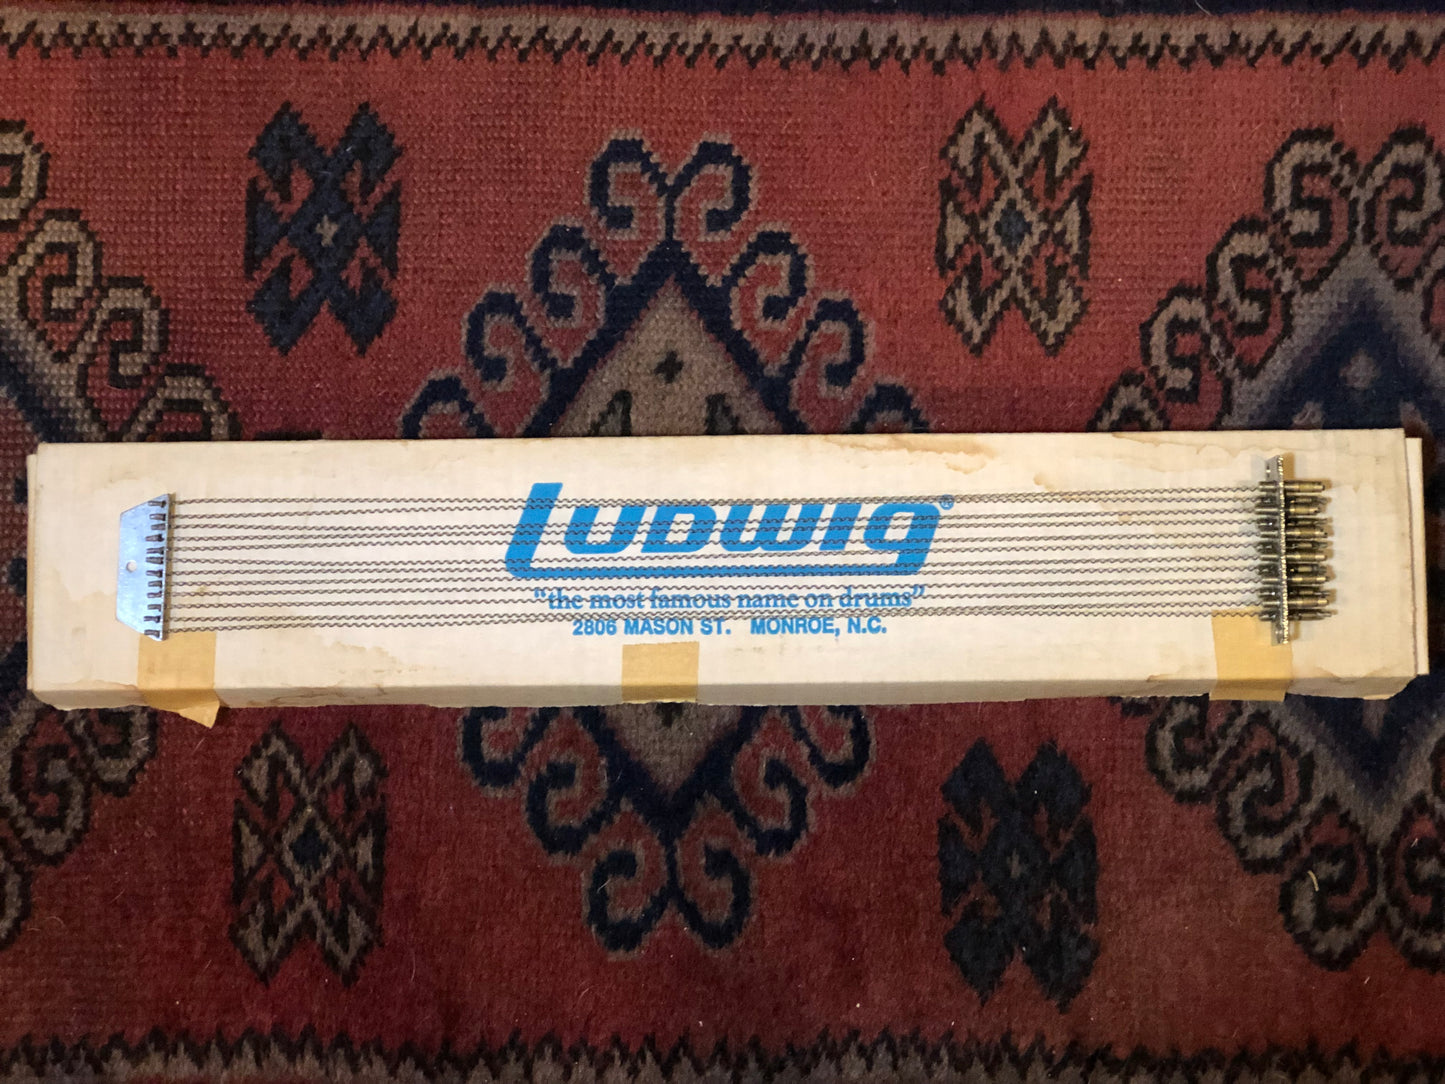 N.O.S. 1960s 14" Ludwig No. L1110 Marching Snare Drum Adjustable Wires 12-Strand